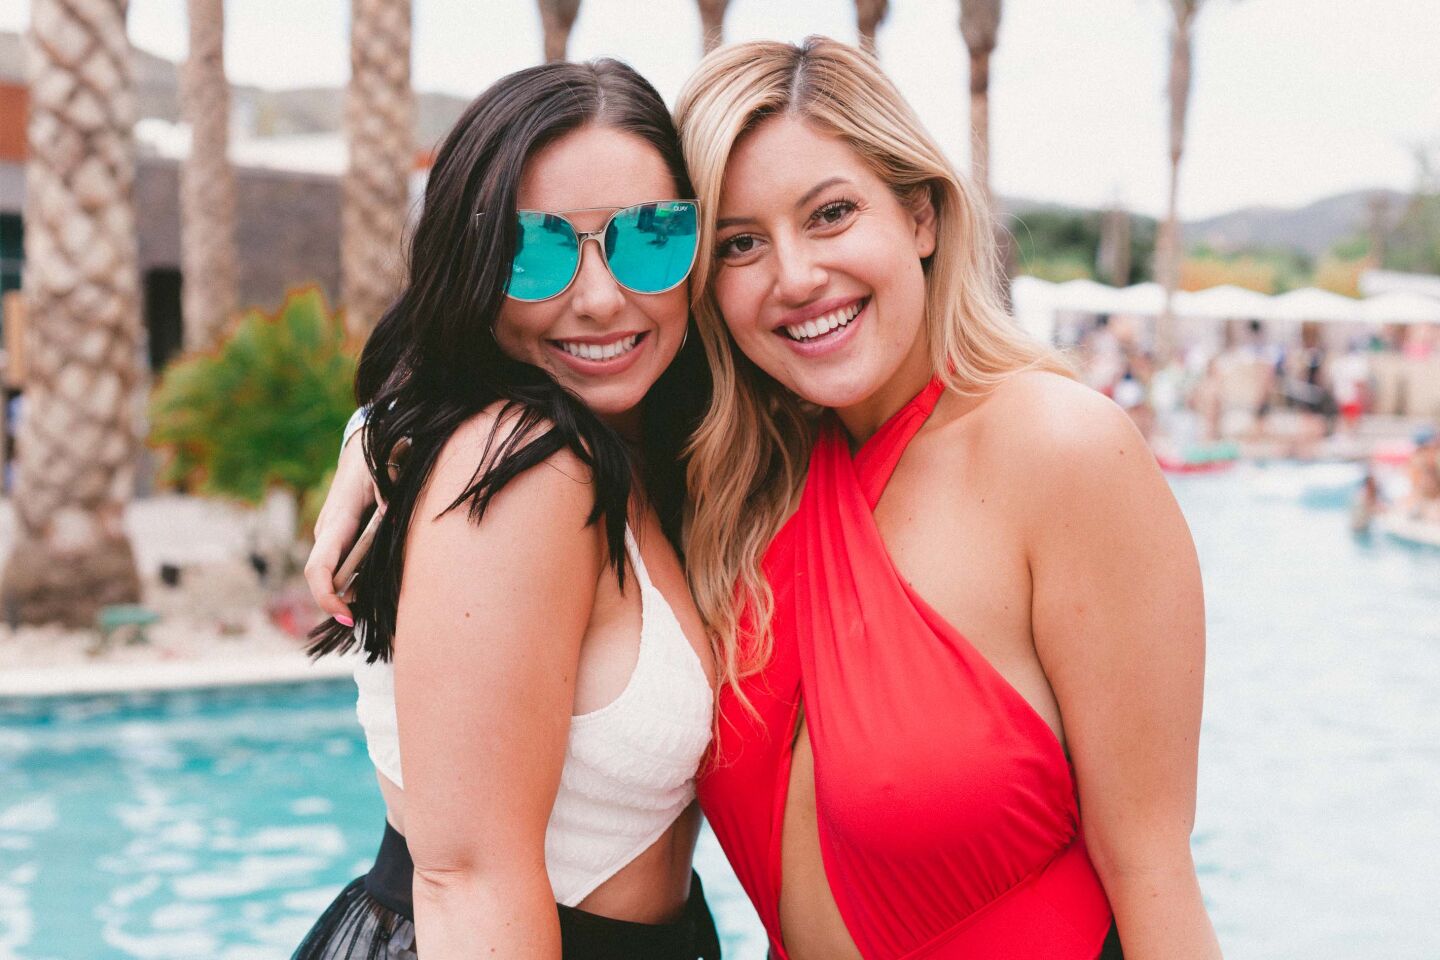 Sam Feldt spun at the opening of Sycuan Casino's DIP Dayclub on Saturday, May 25, 2019.